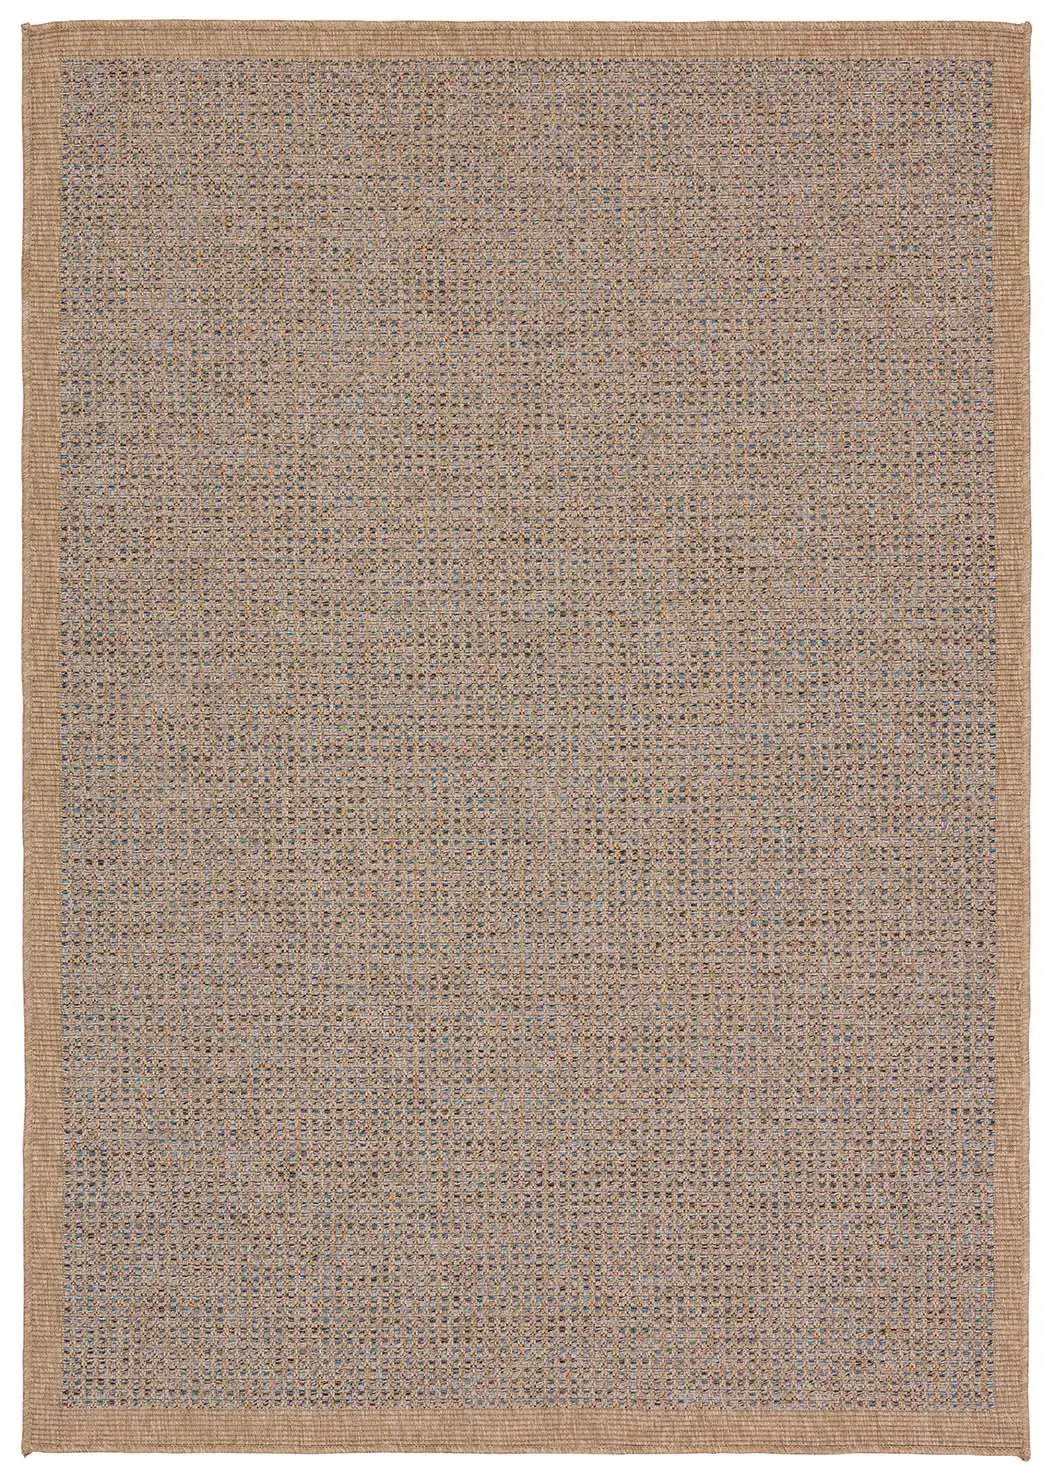 Vibe by Jaipur Living Kidal Indoor/Outdoor Solid Brown/ Blue Runner Rug  Product Image